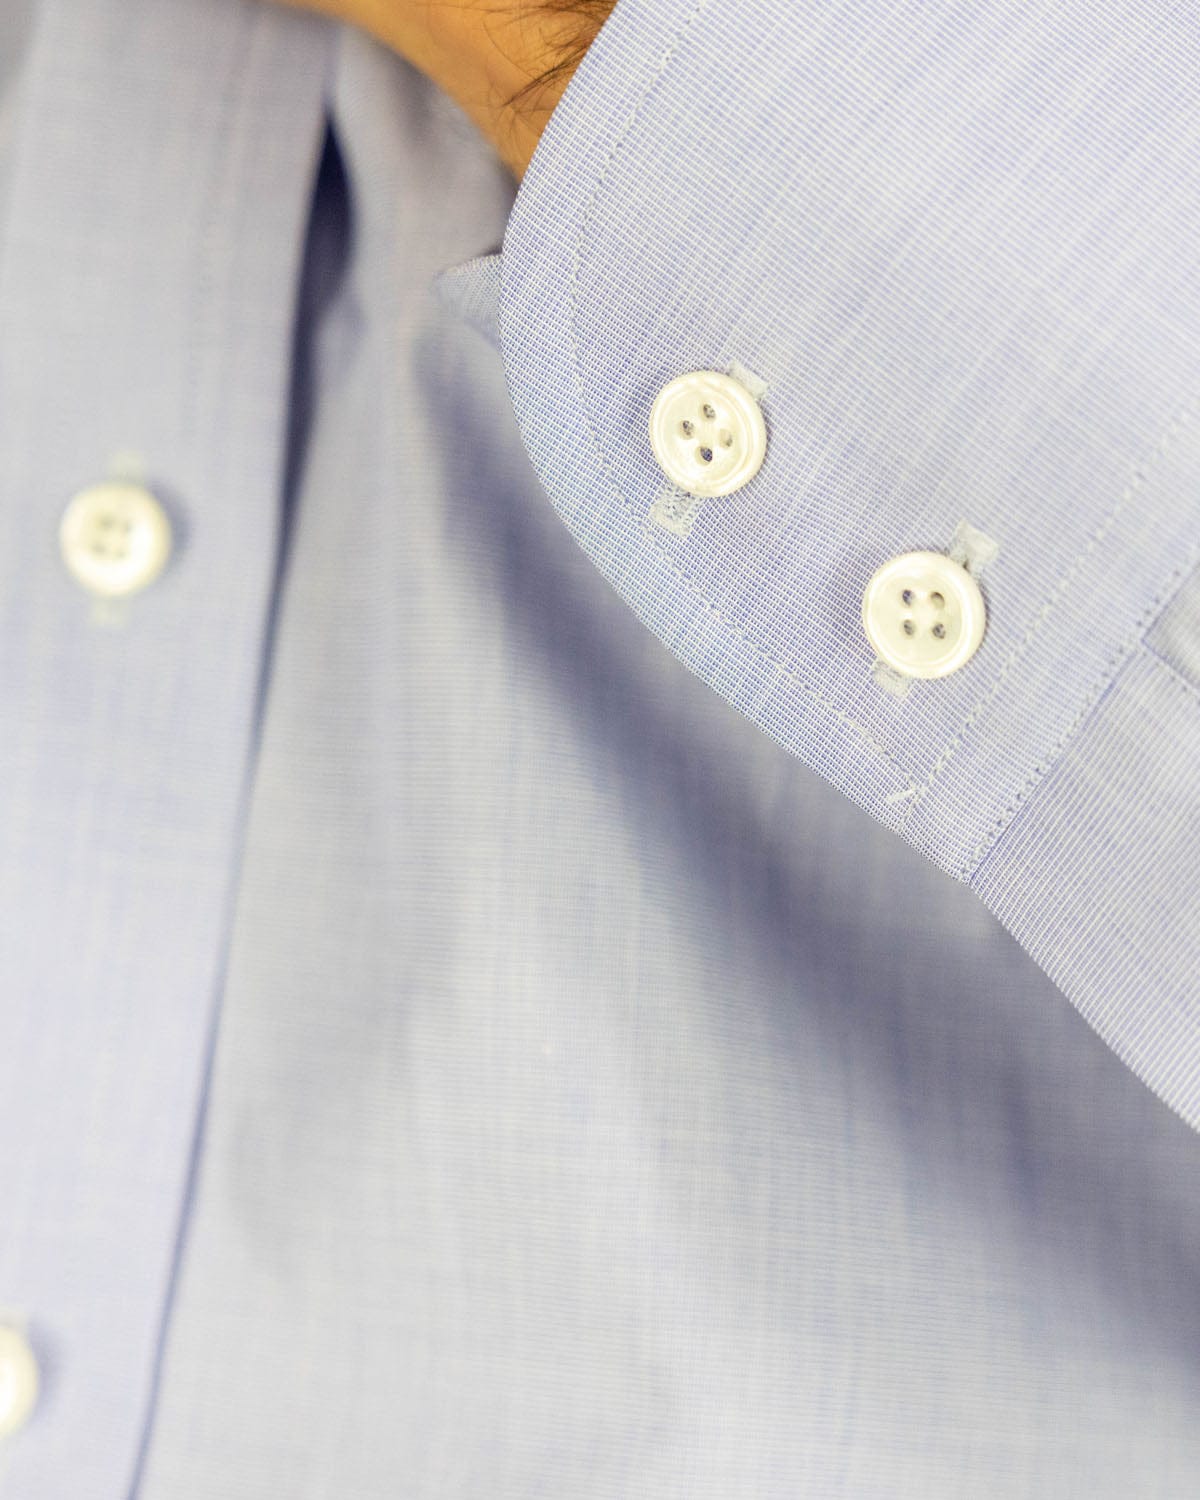 Classic Fit, Classic Collar, 2 Button Cuff Shirt in a Plain Blue End-On-End Cotton - Hilditch & Key